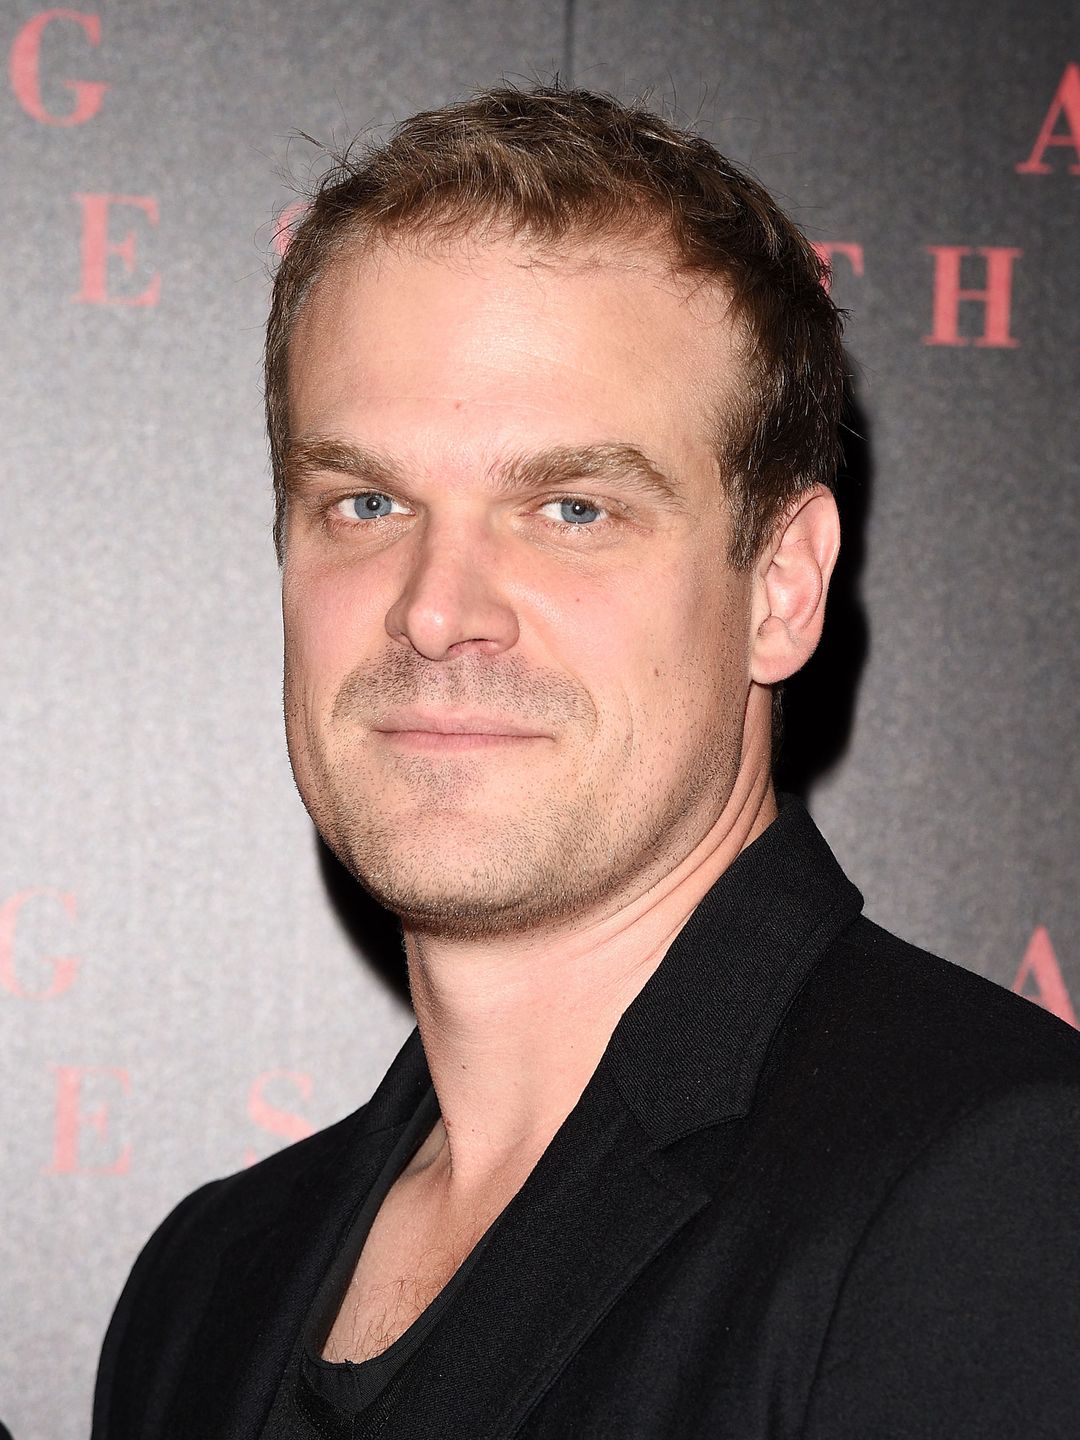 David Harbour where is he now